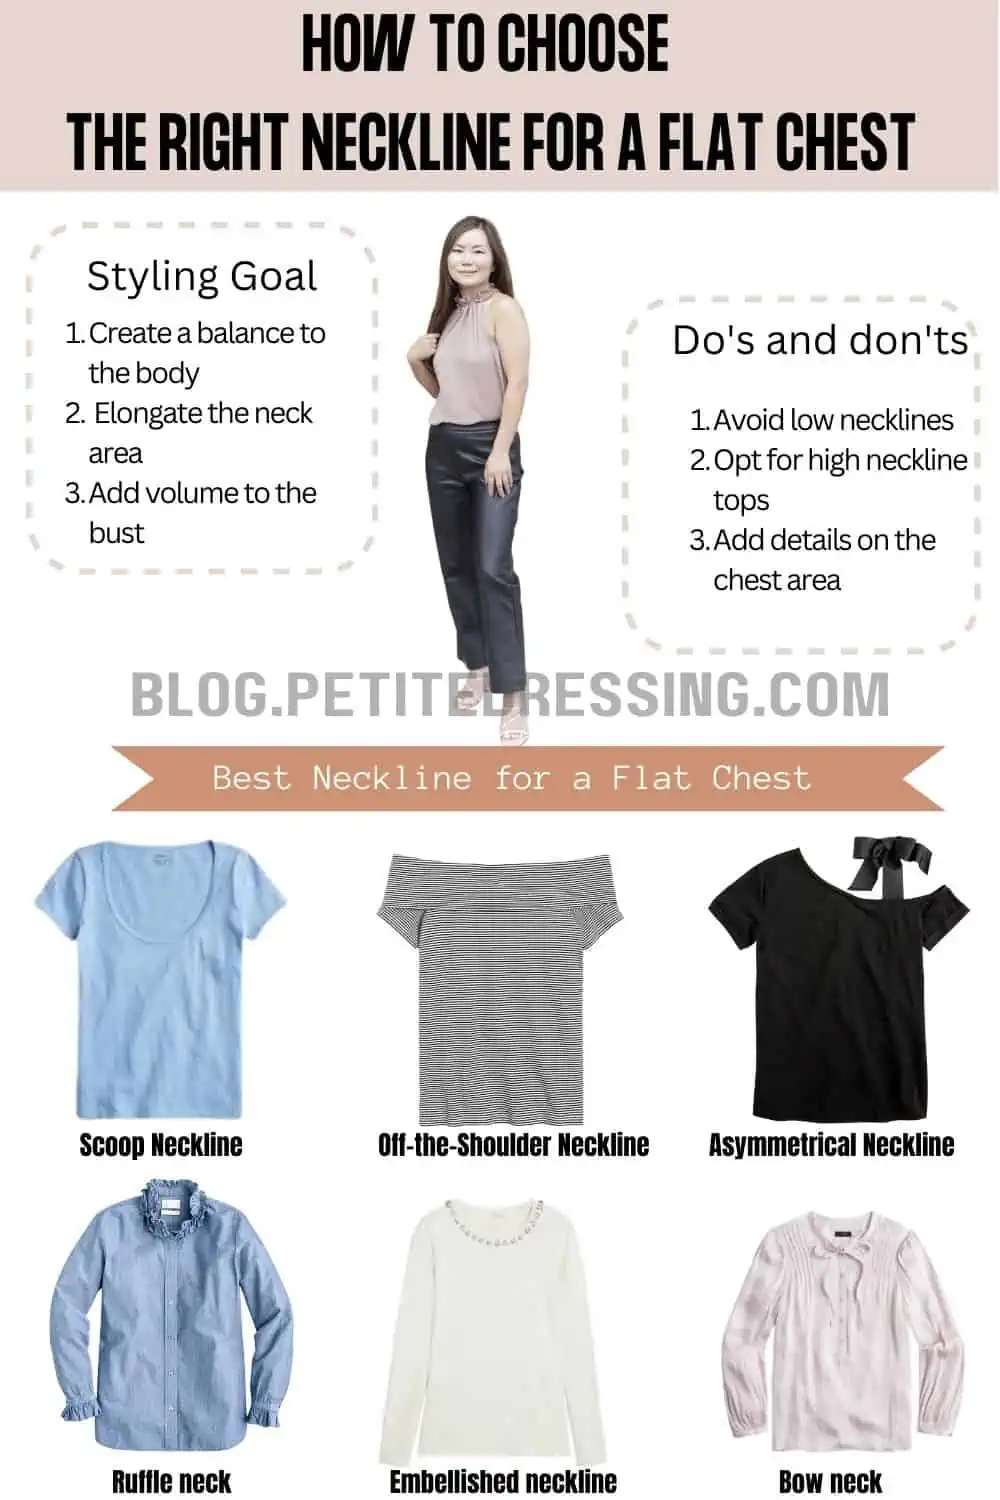 https://blog.petitedressing.com/wp-content/uploads/2022/02/How-to-Choose-the-Right-Neckline-for-a-Flat-Chest-1.webp